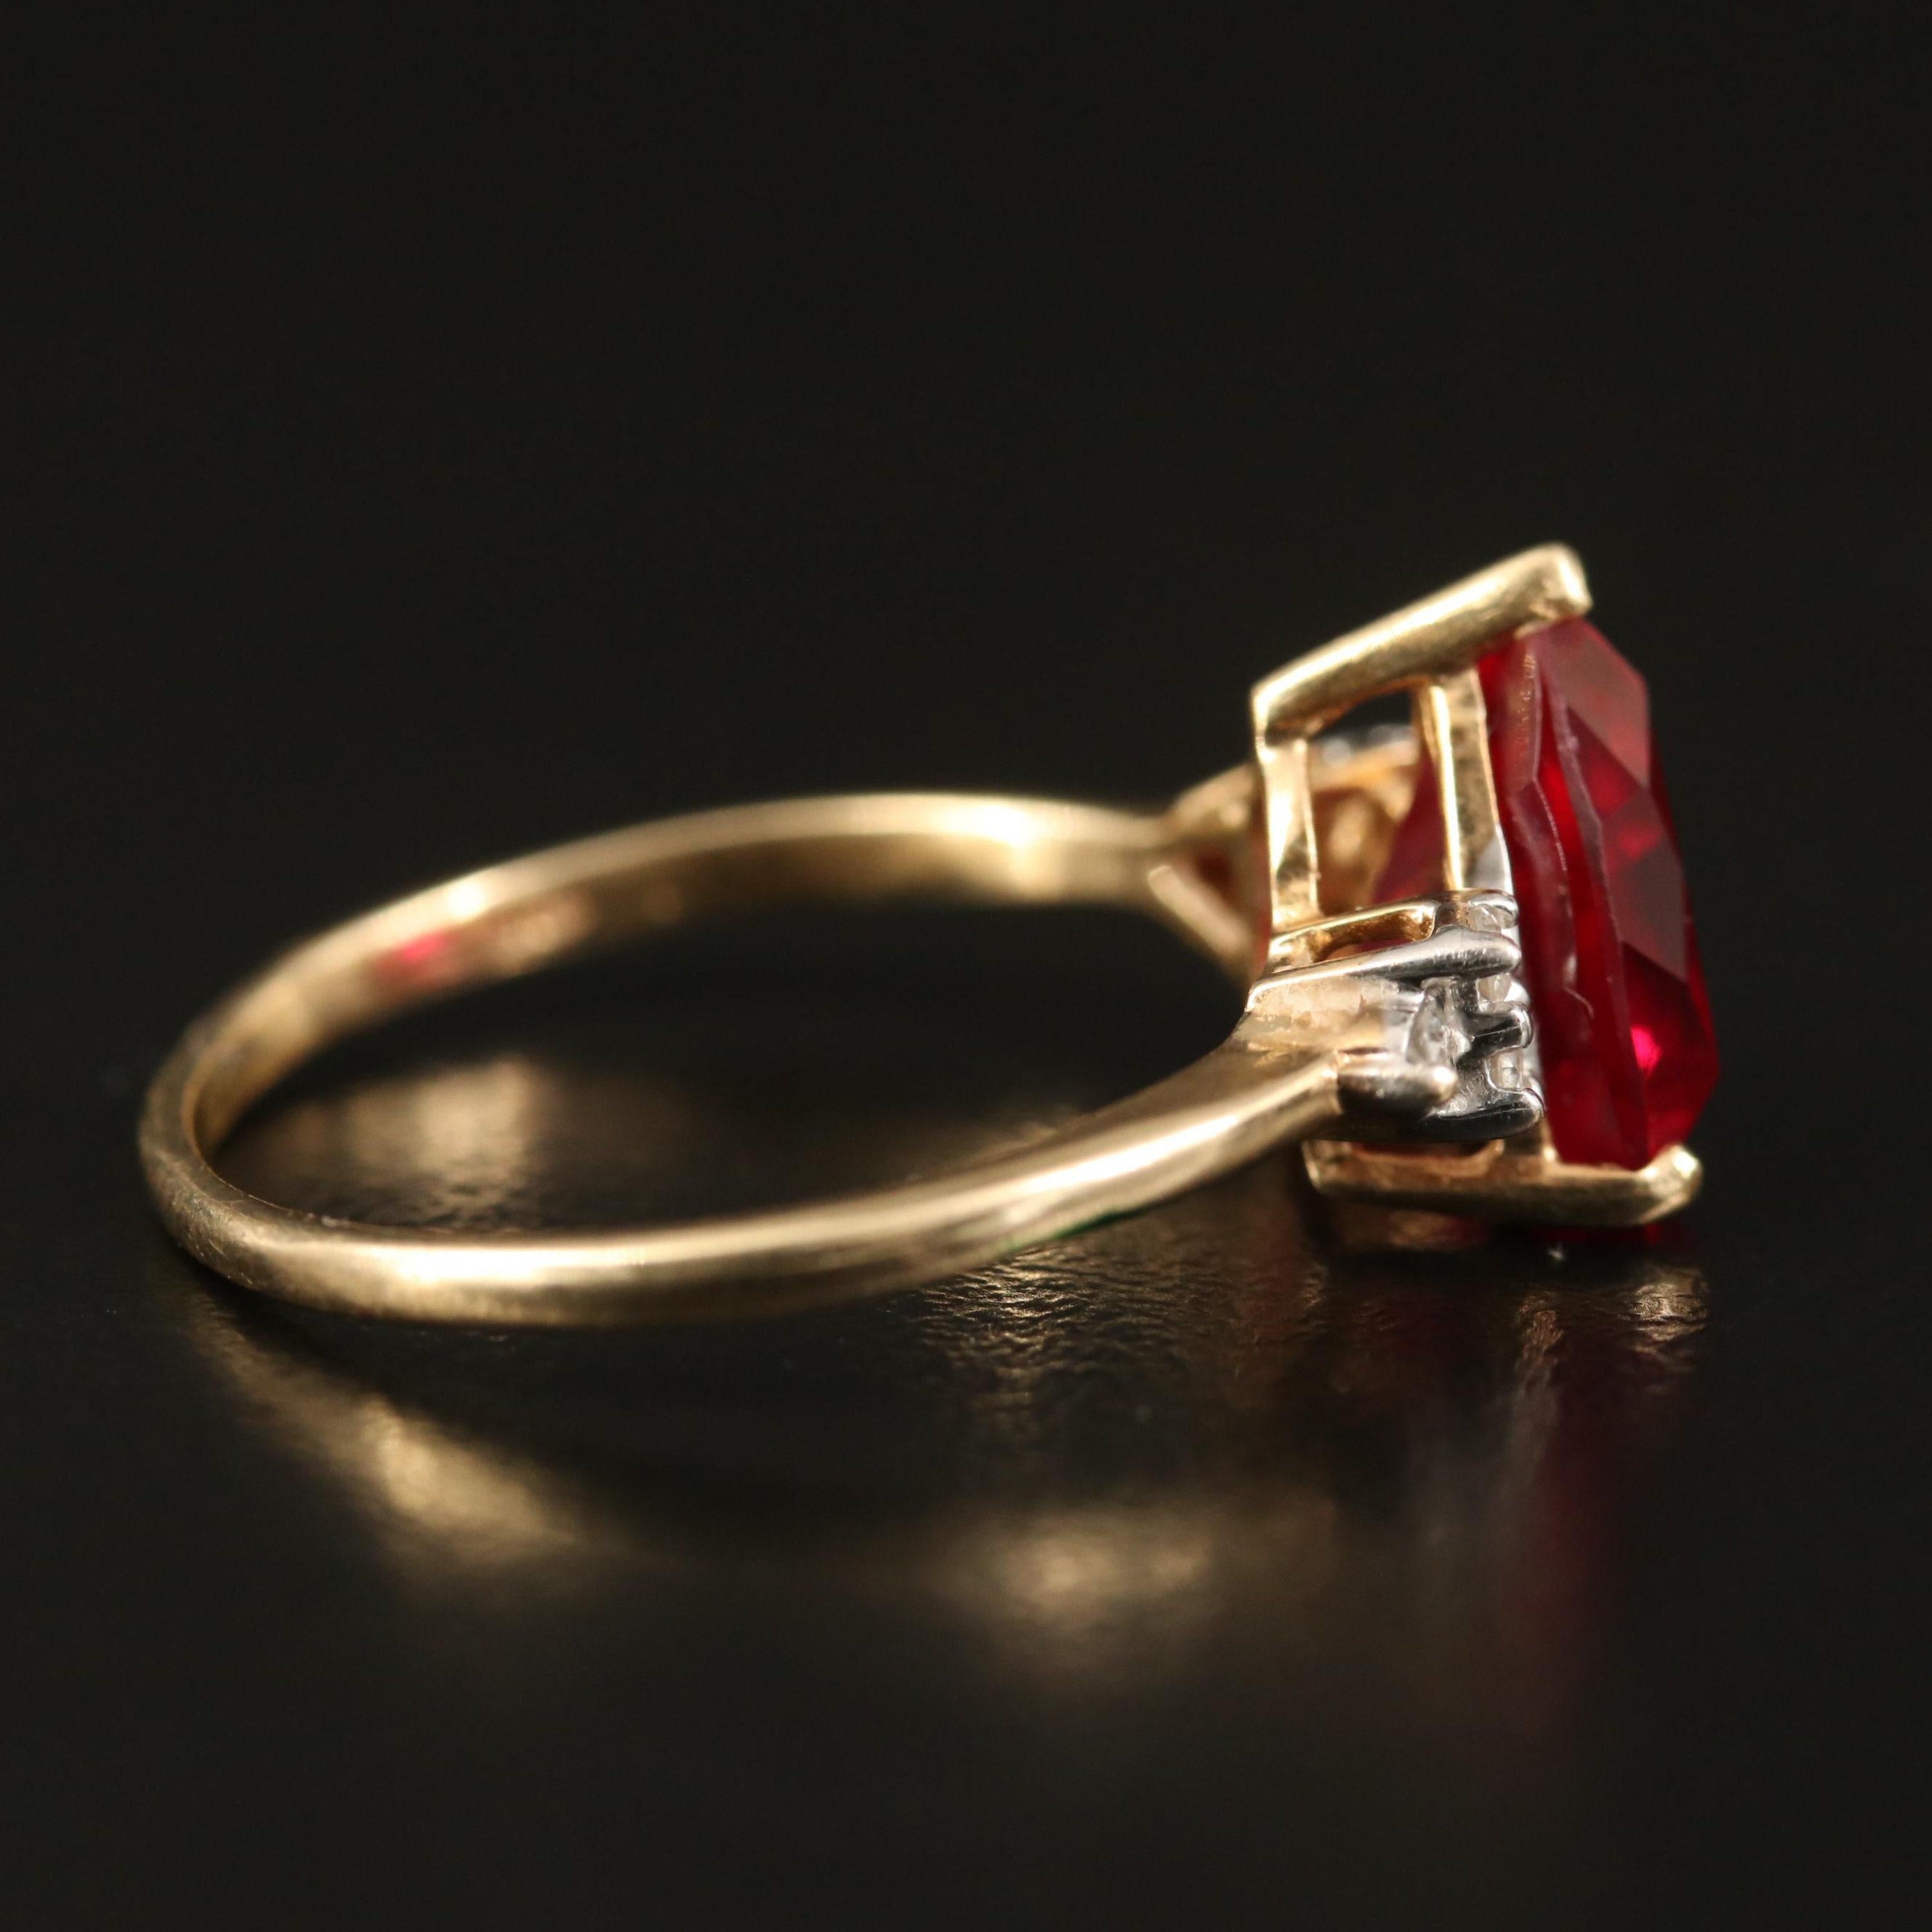 For Sale:  2 Carat Trilliant Cut Ruby Diamond Engagement Ring Antique Victorian Ruby Ring 2